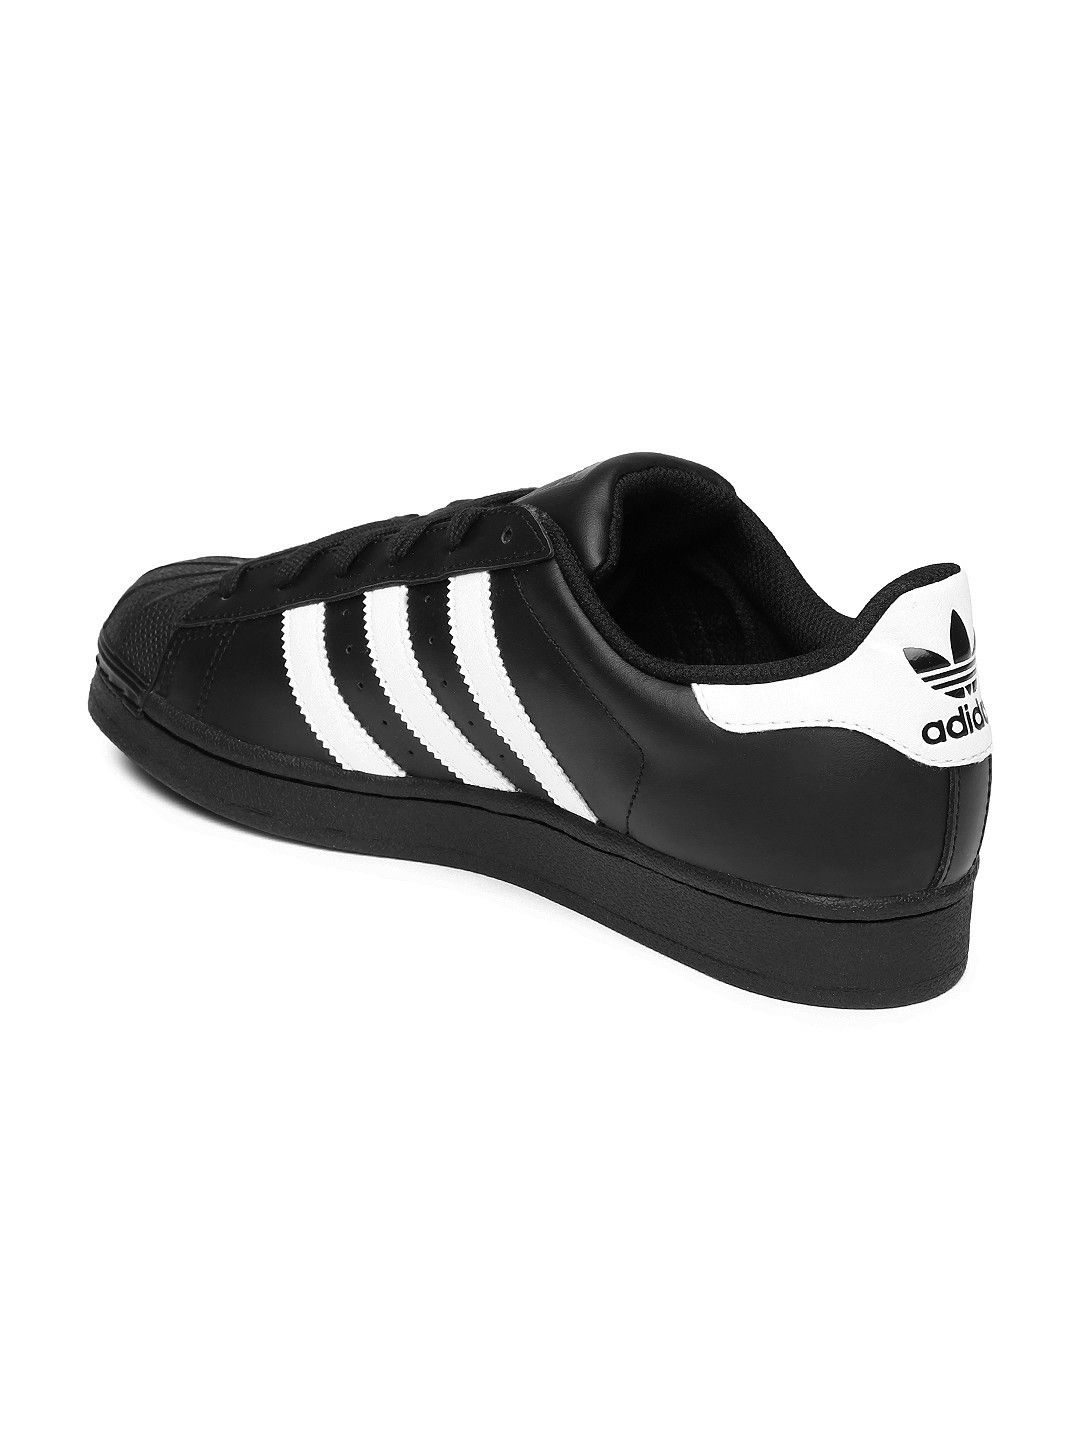 adidas superstar shoes first copy online